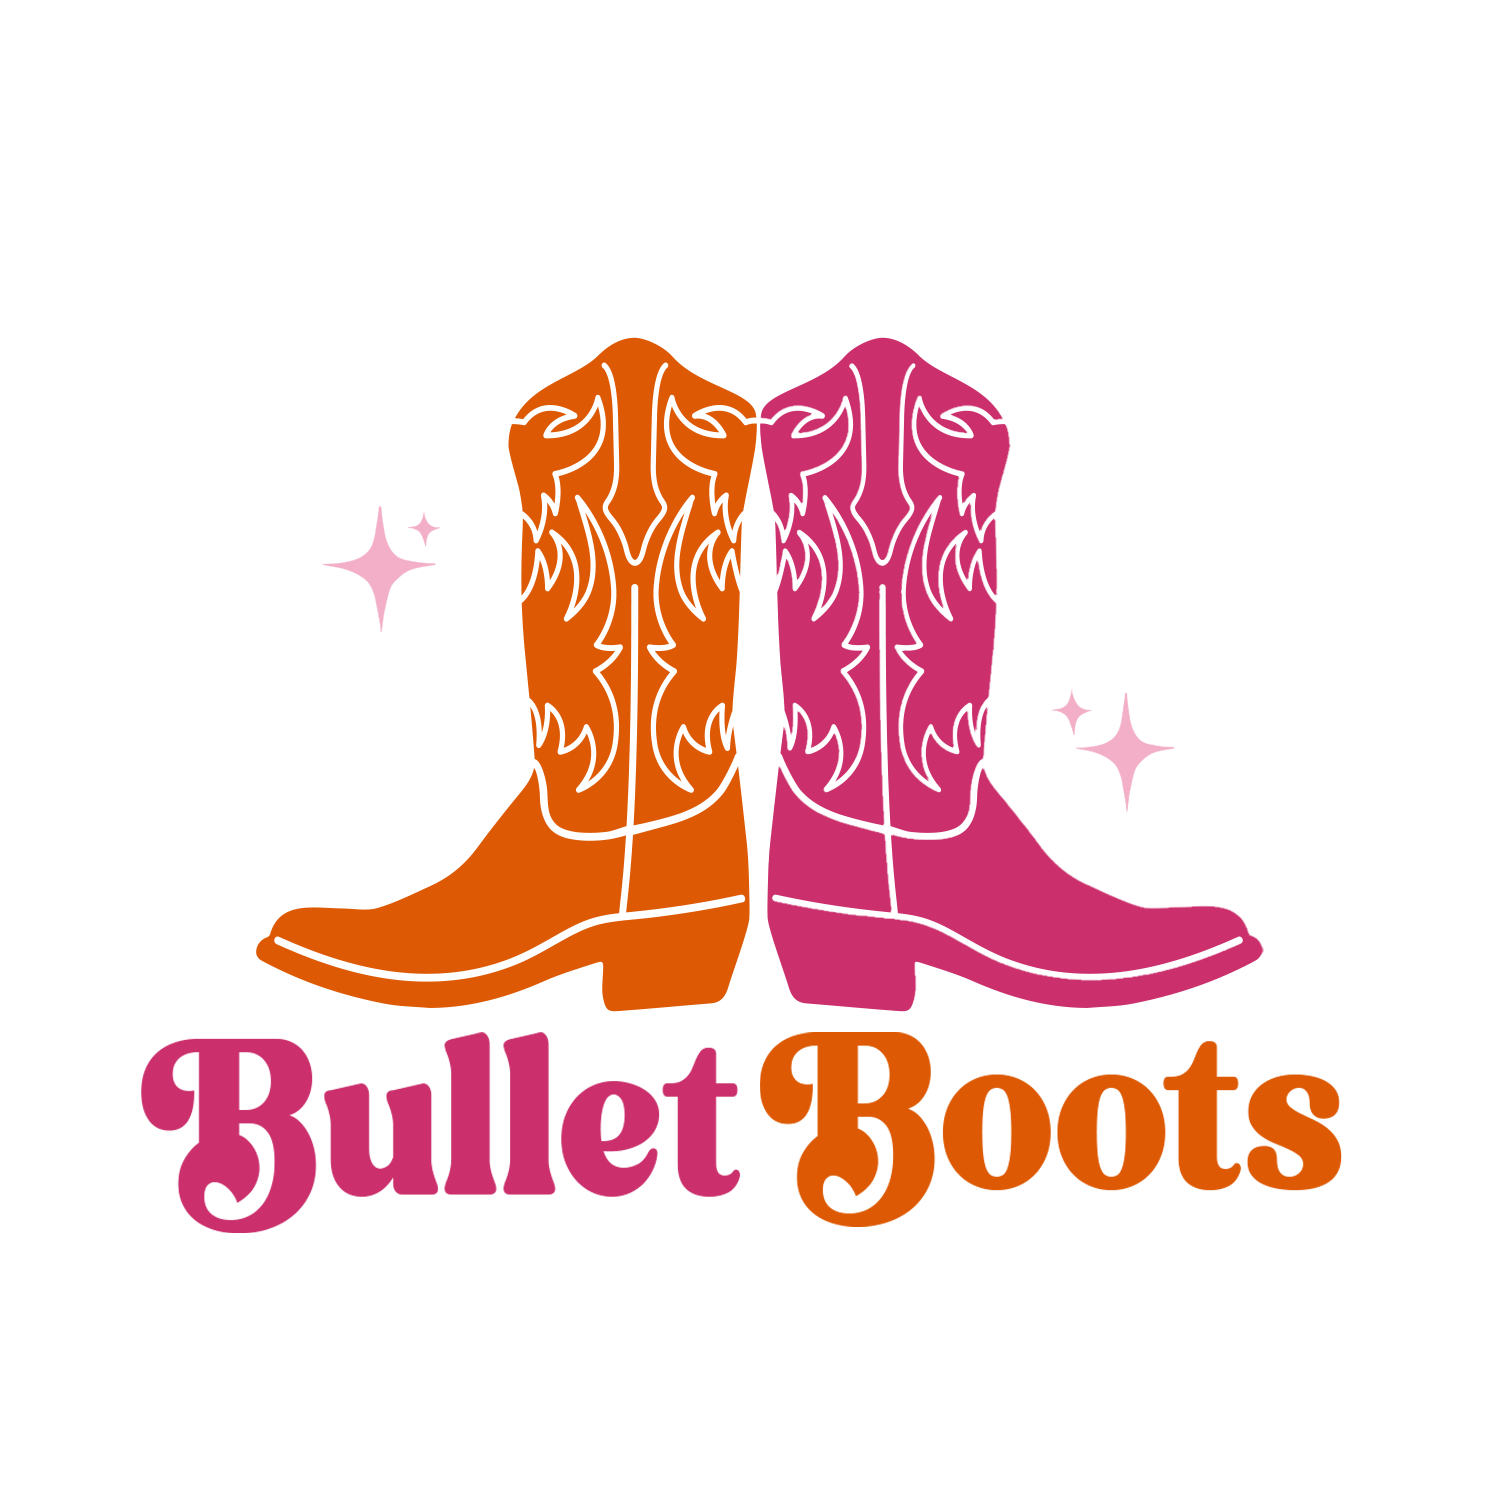 Upcycled Accessories – Bullet Boots